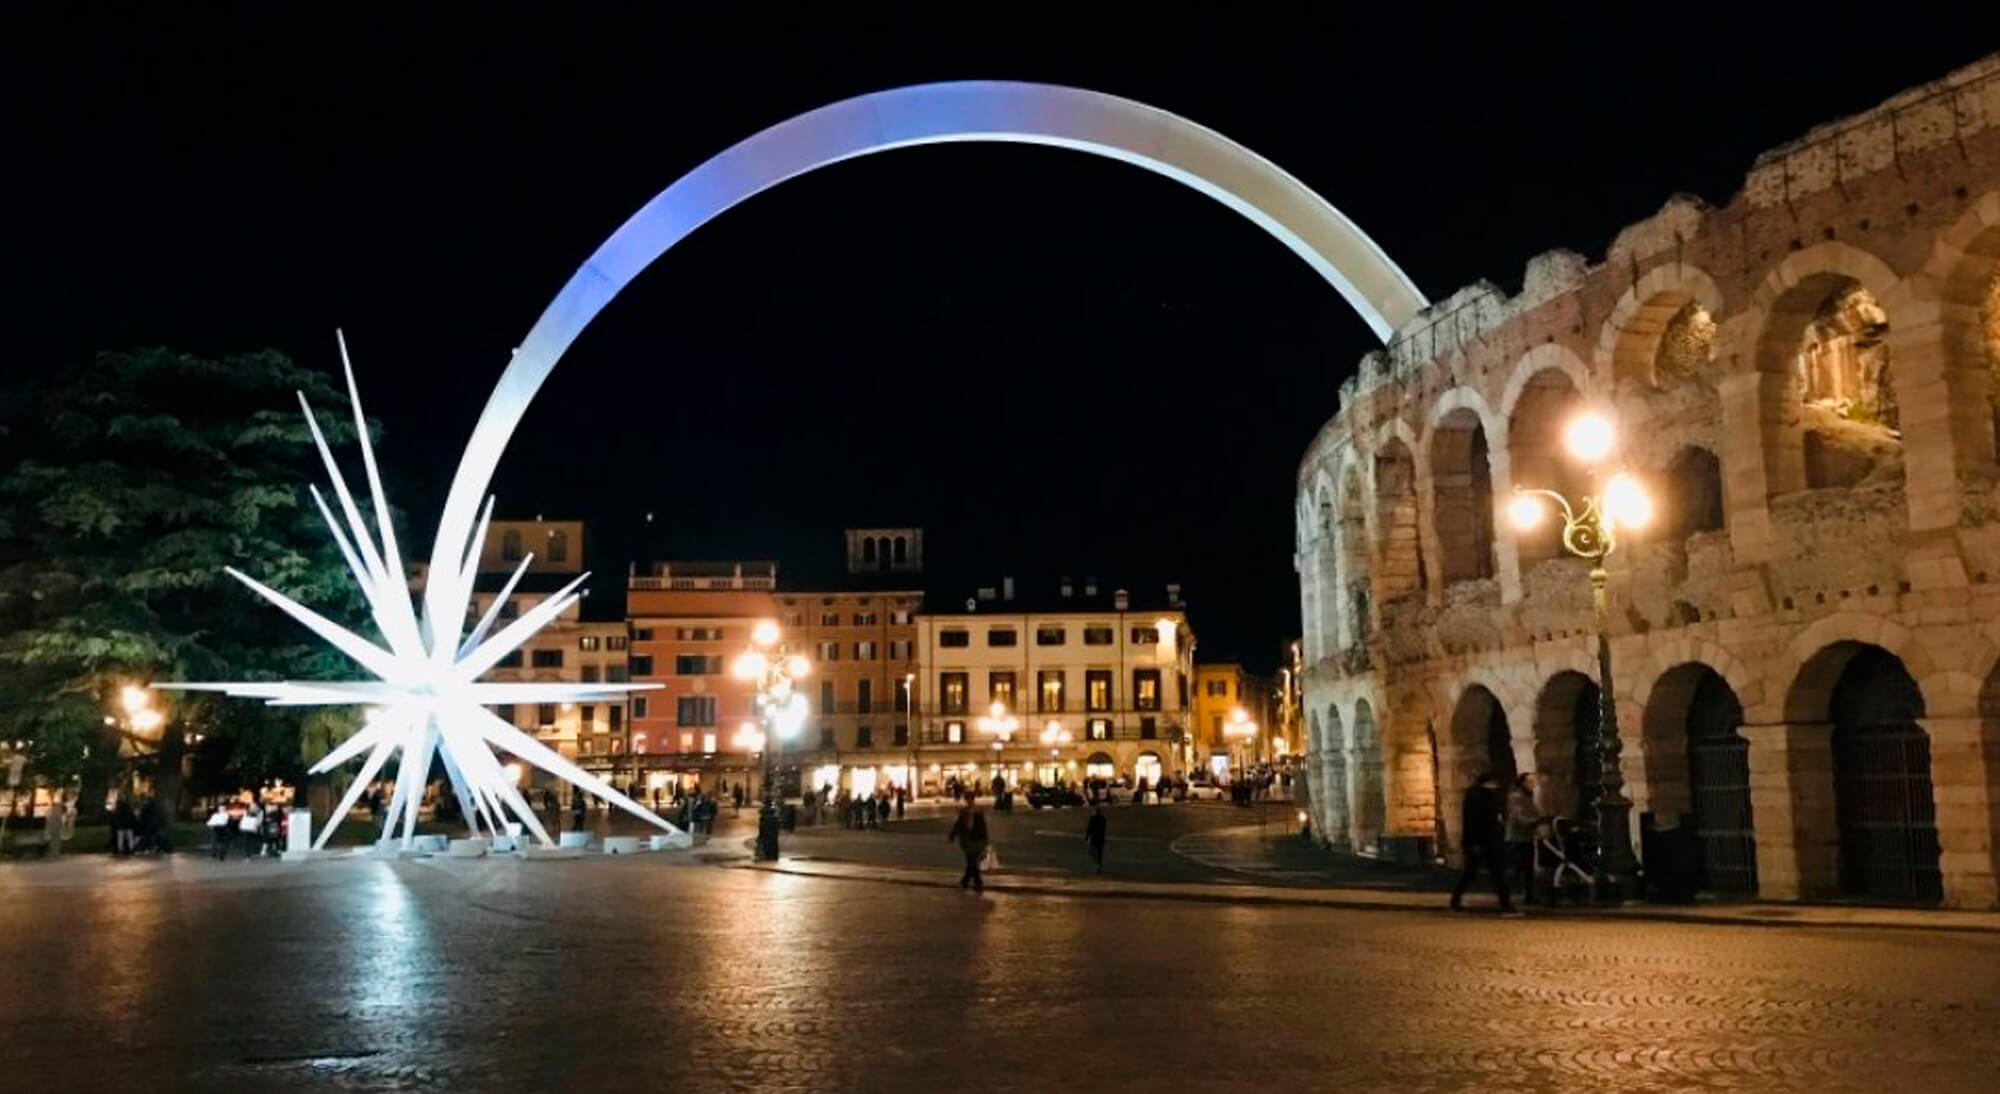 Verona a fairy tale Christmas atmosphere combined with a special food wine experience